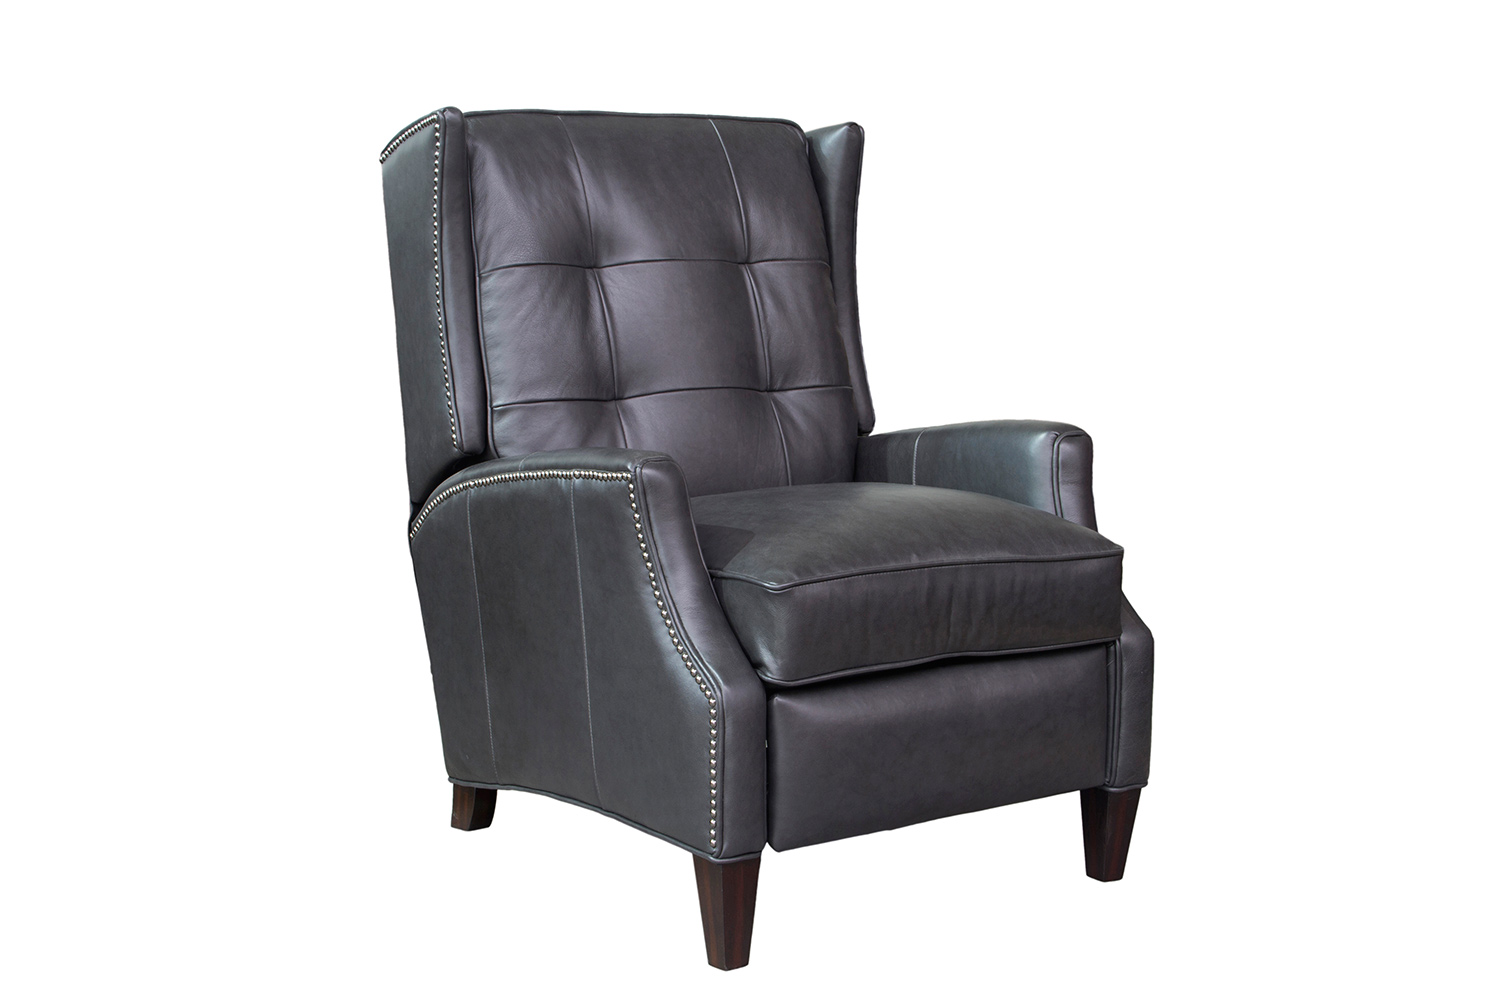 Barcalounger Lincoln Recliner Chair - Shoreham Gray/All Leather